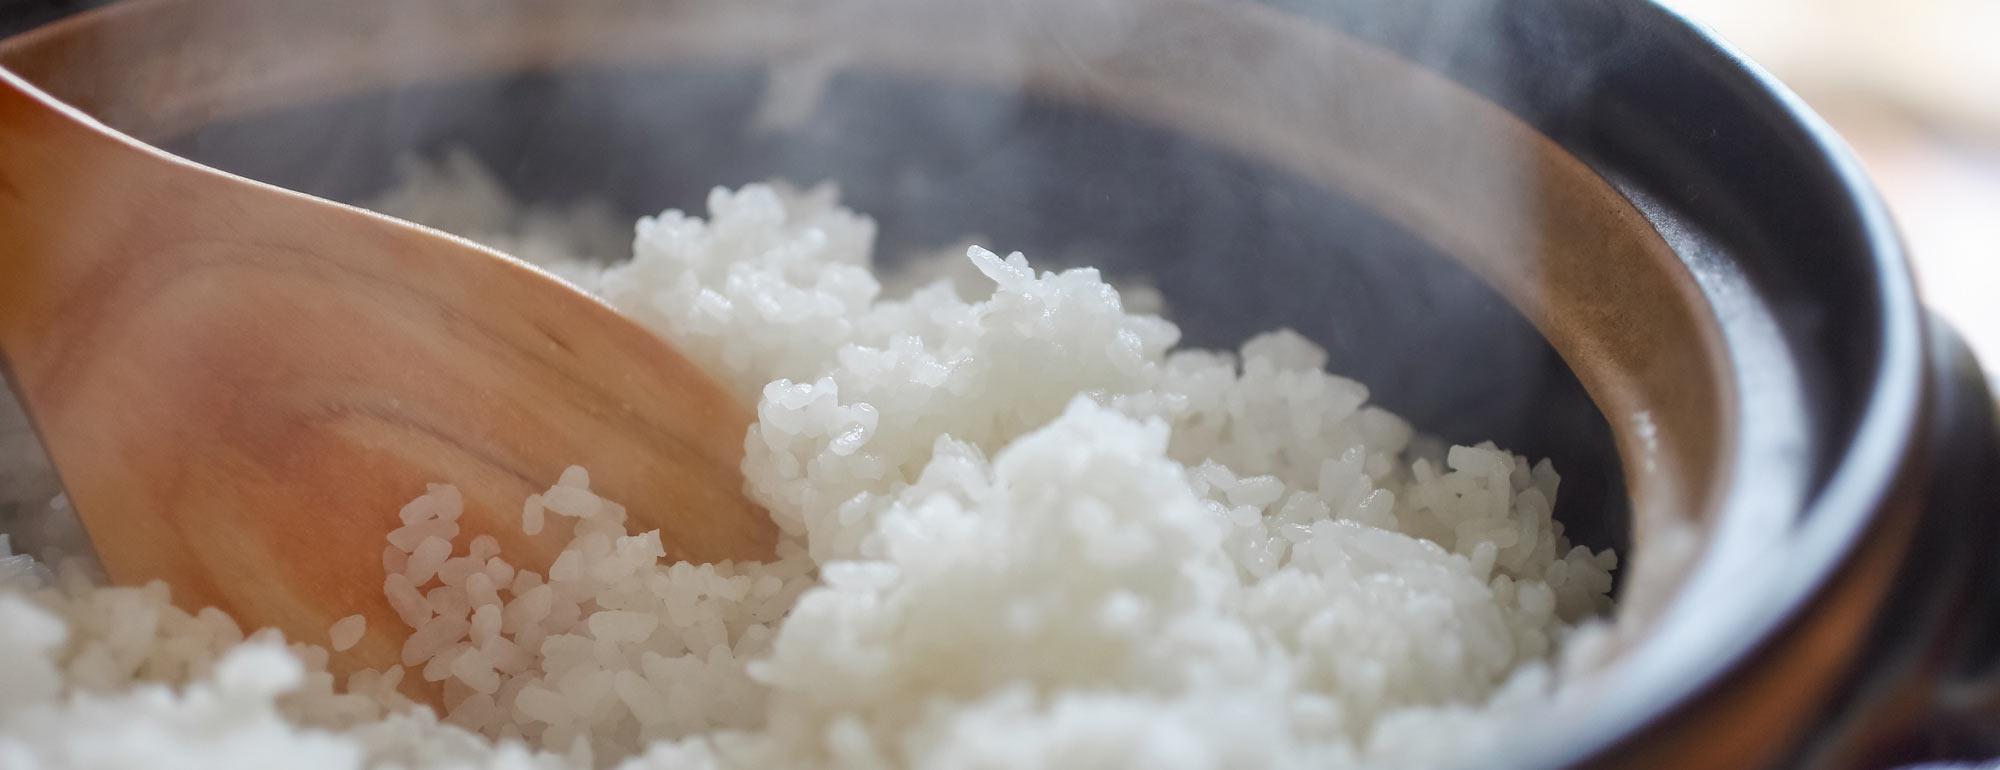 A steaming bowl of rice